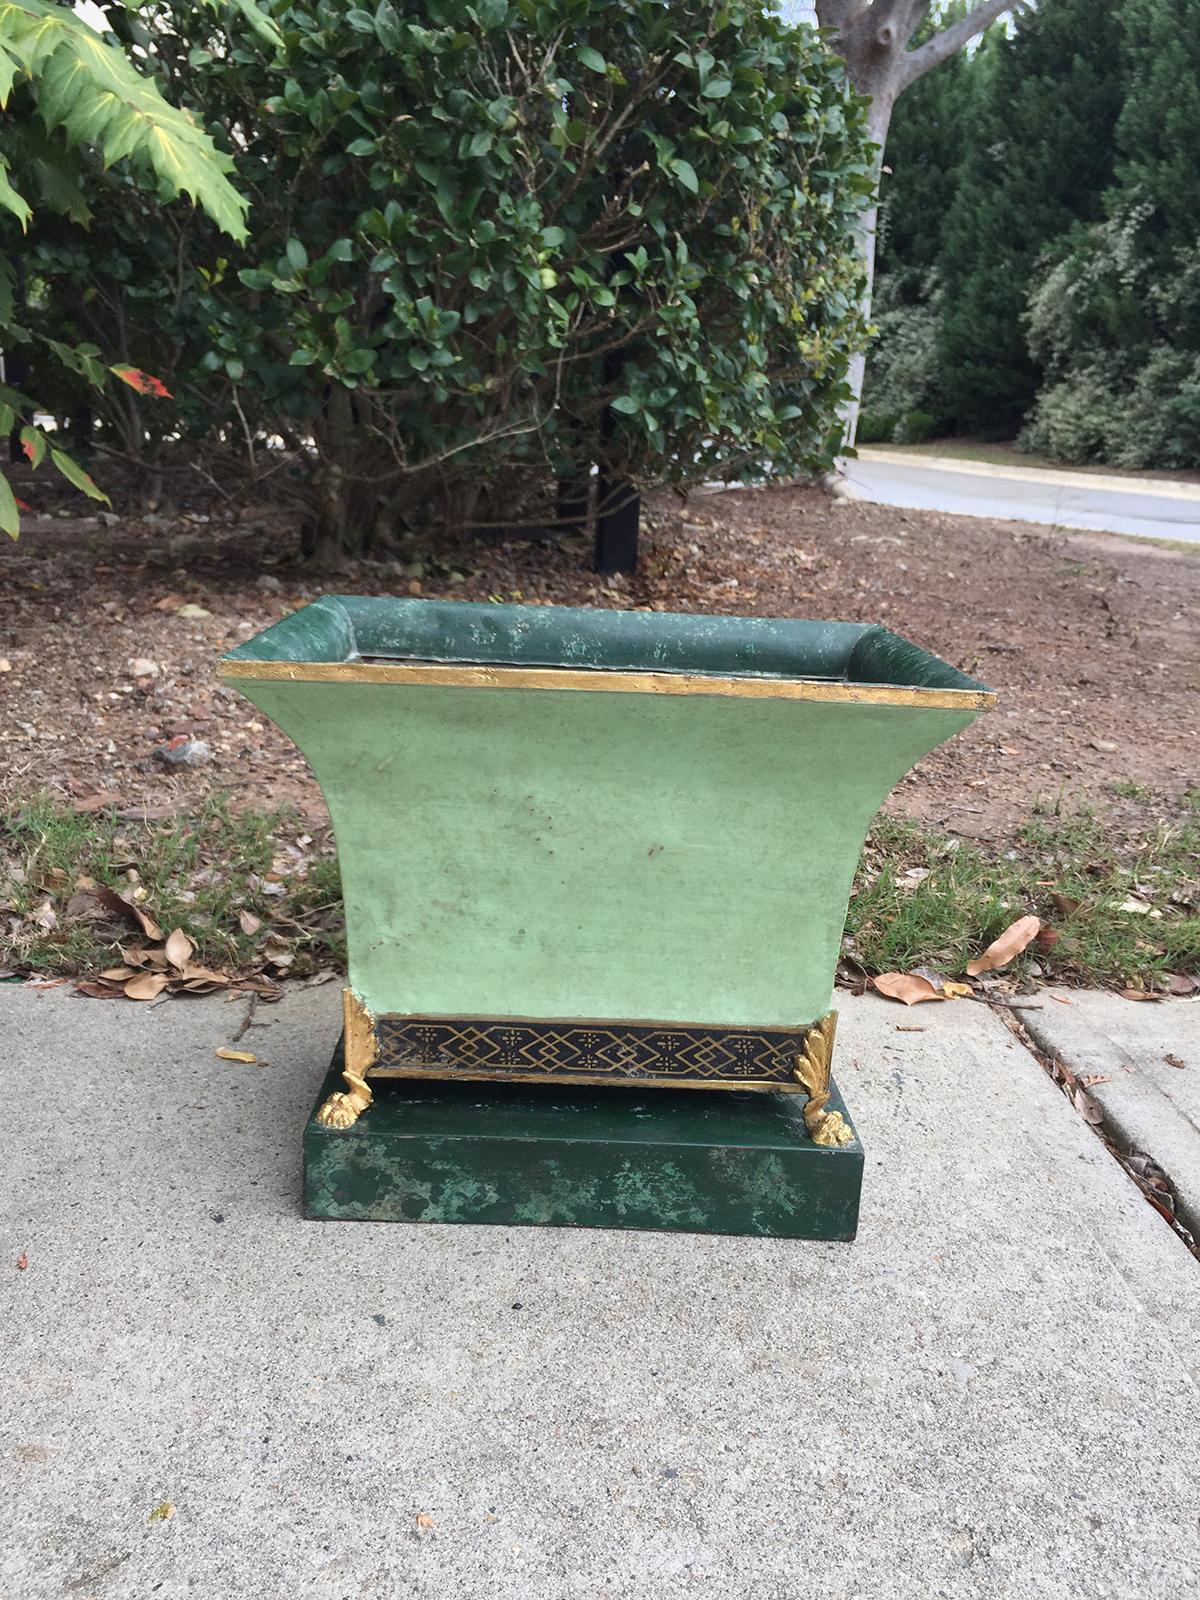 20th century French green tole cachepot with paw feet, painted black and gold band with gilt trim. Beautiful green finish with marbleized base and rim.